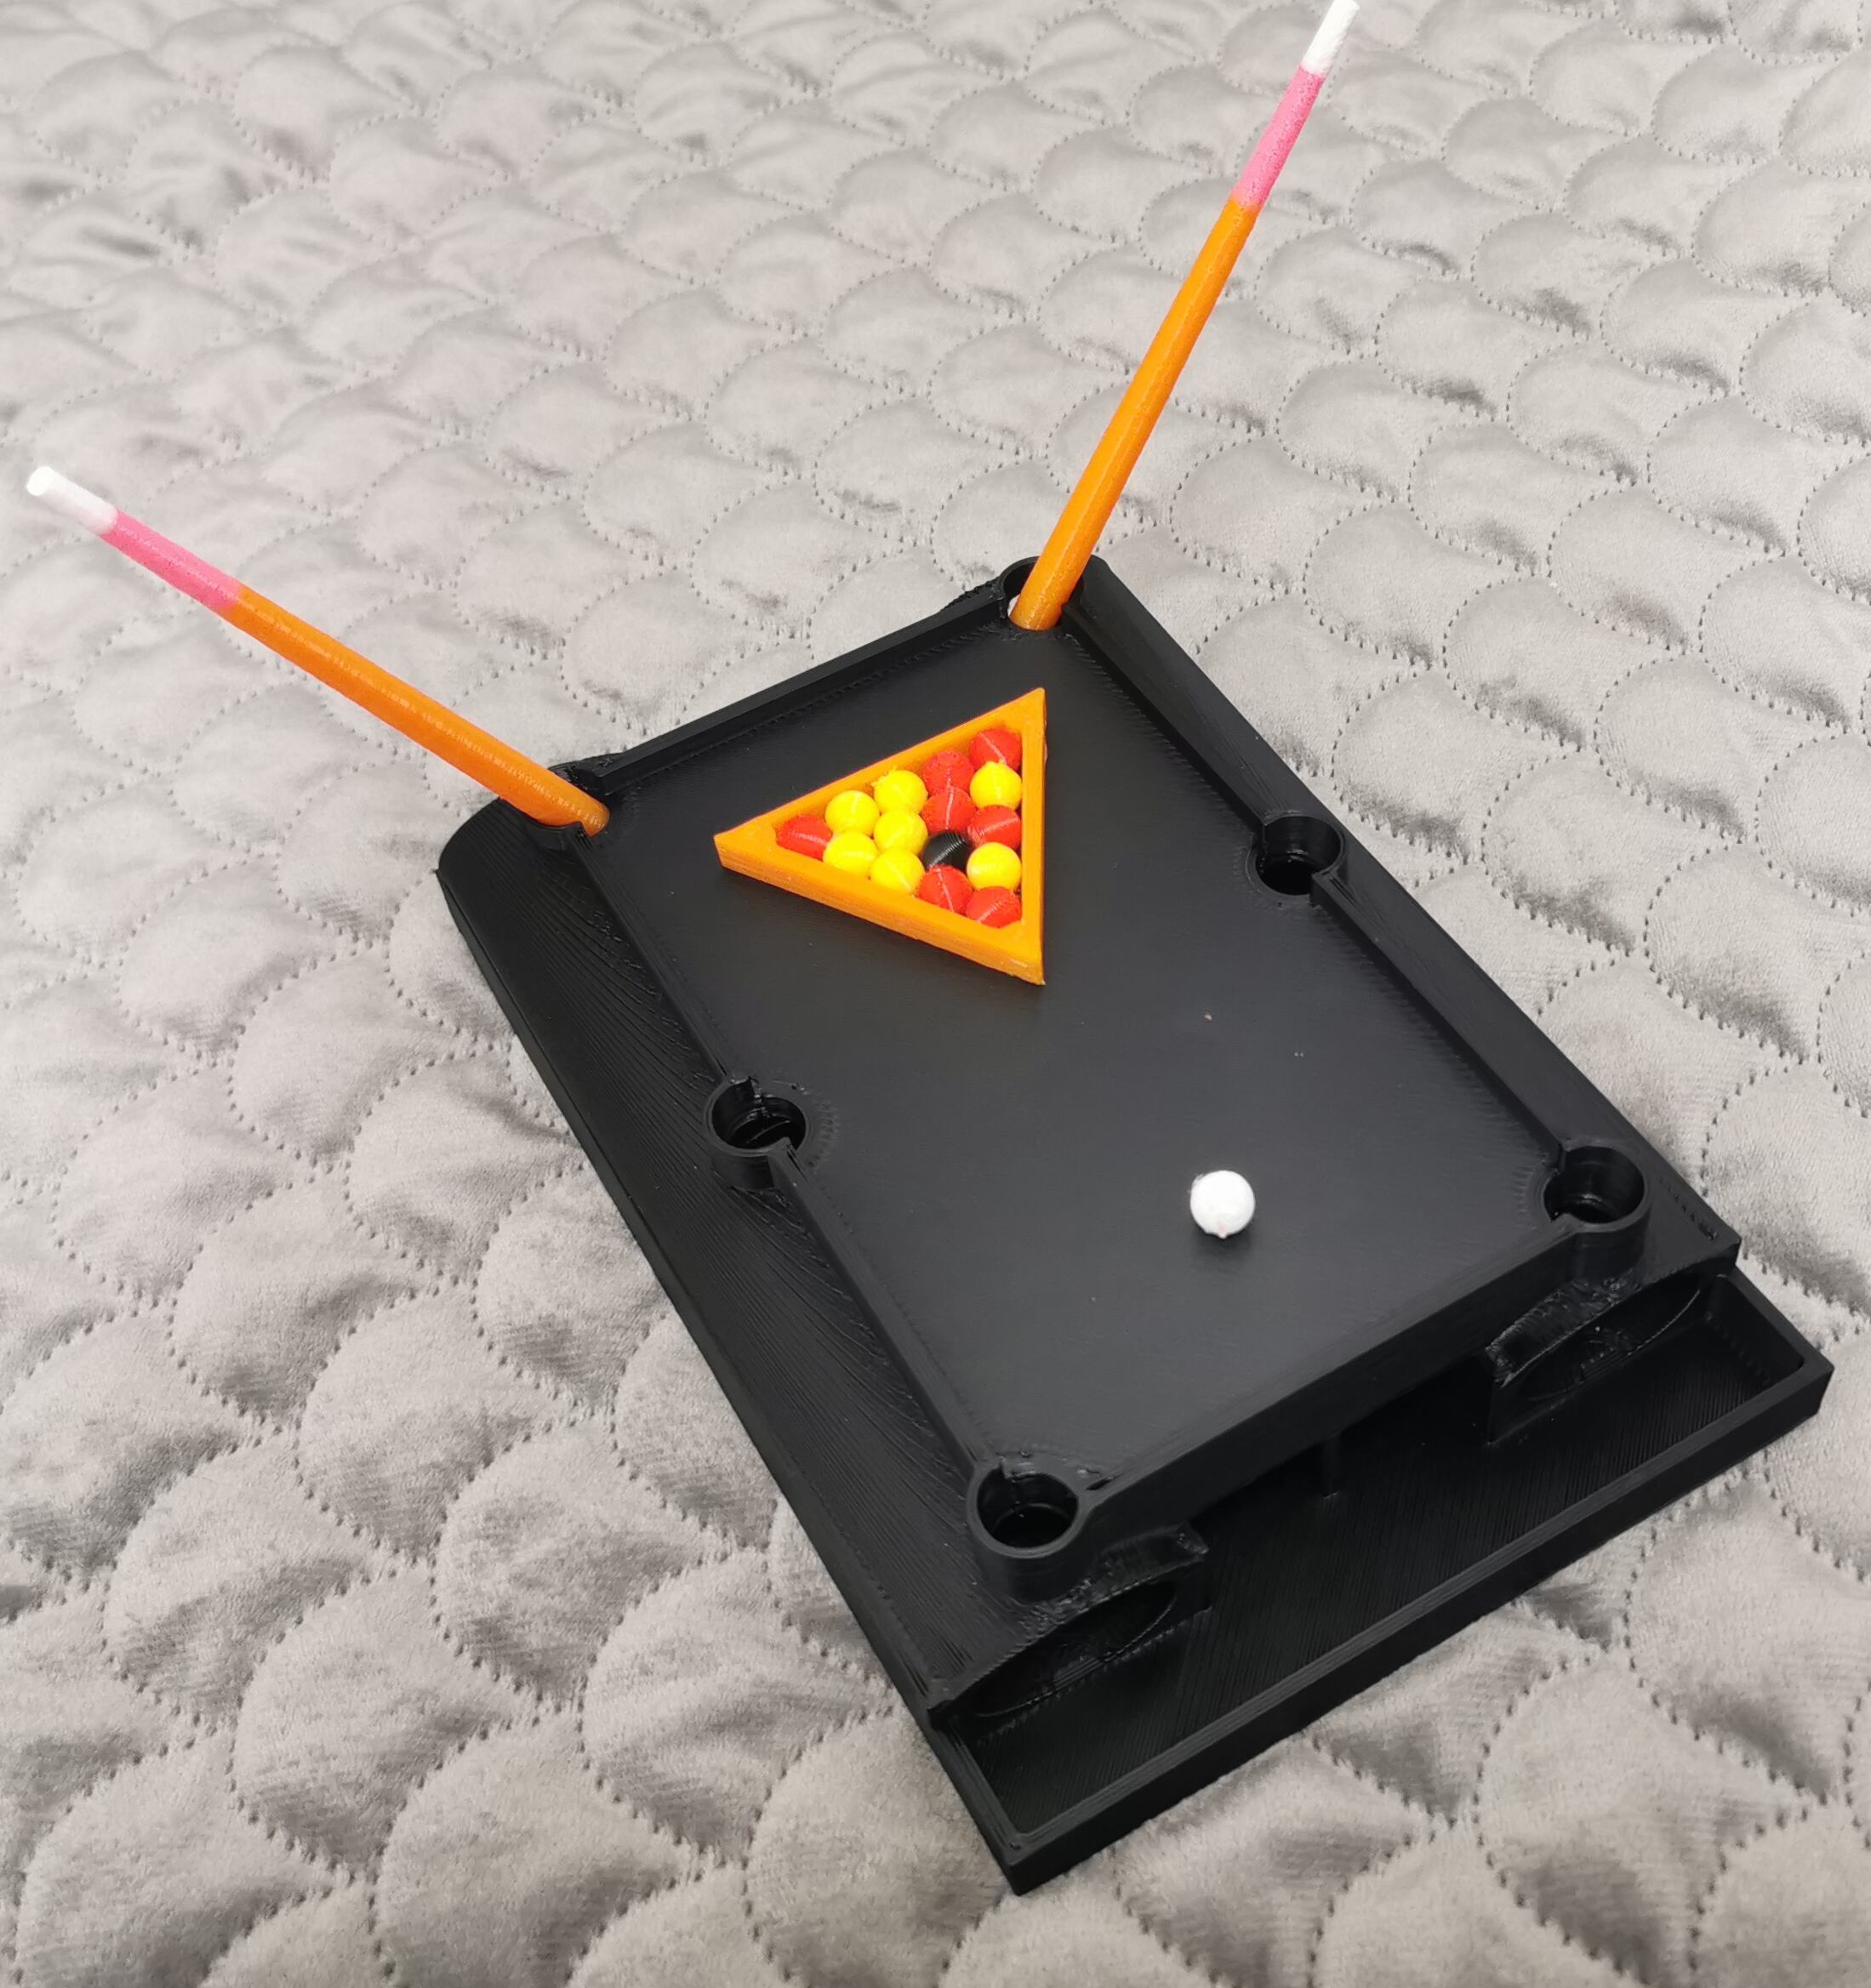 Desktop Pool Table + Accessories - No Support Needed